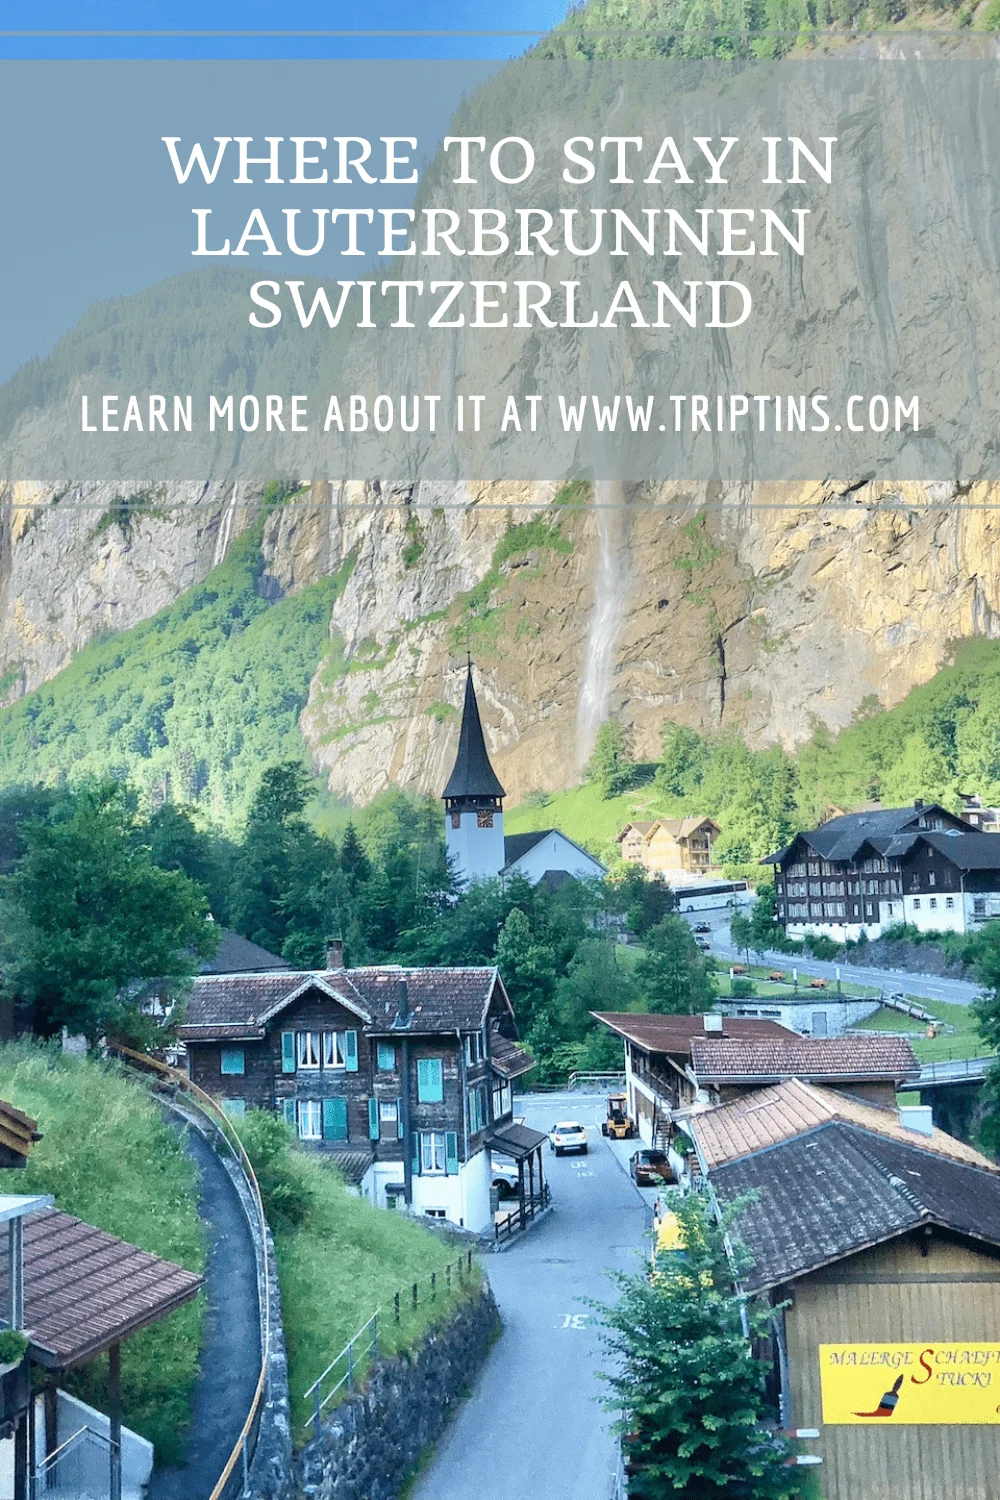 Where to Stay in Lauterbrunnen